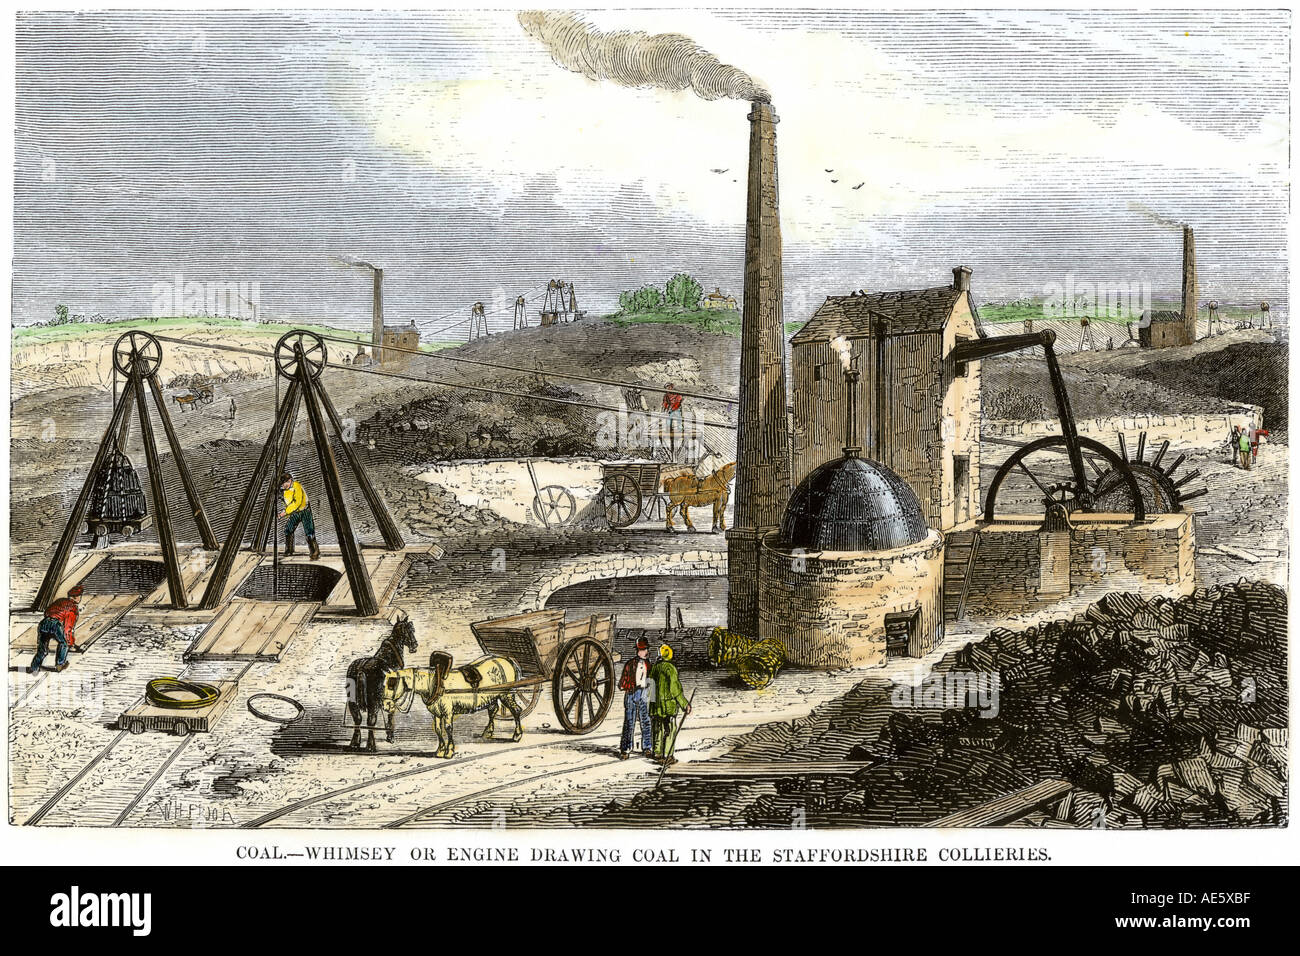 Whimsey engine drawing coal in the Staffordshire mines England 1850s. Hand-colored woodcut Stock Photo